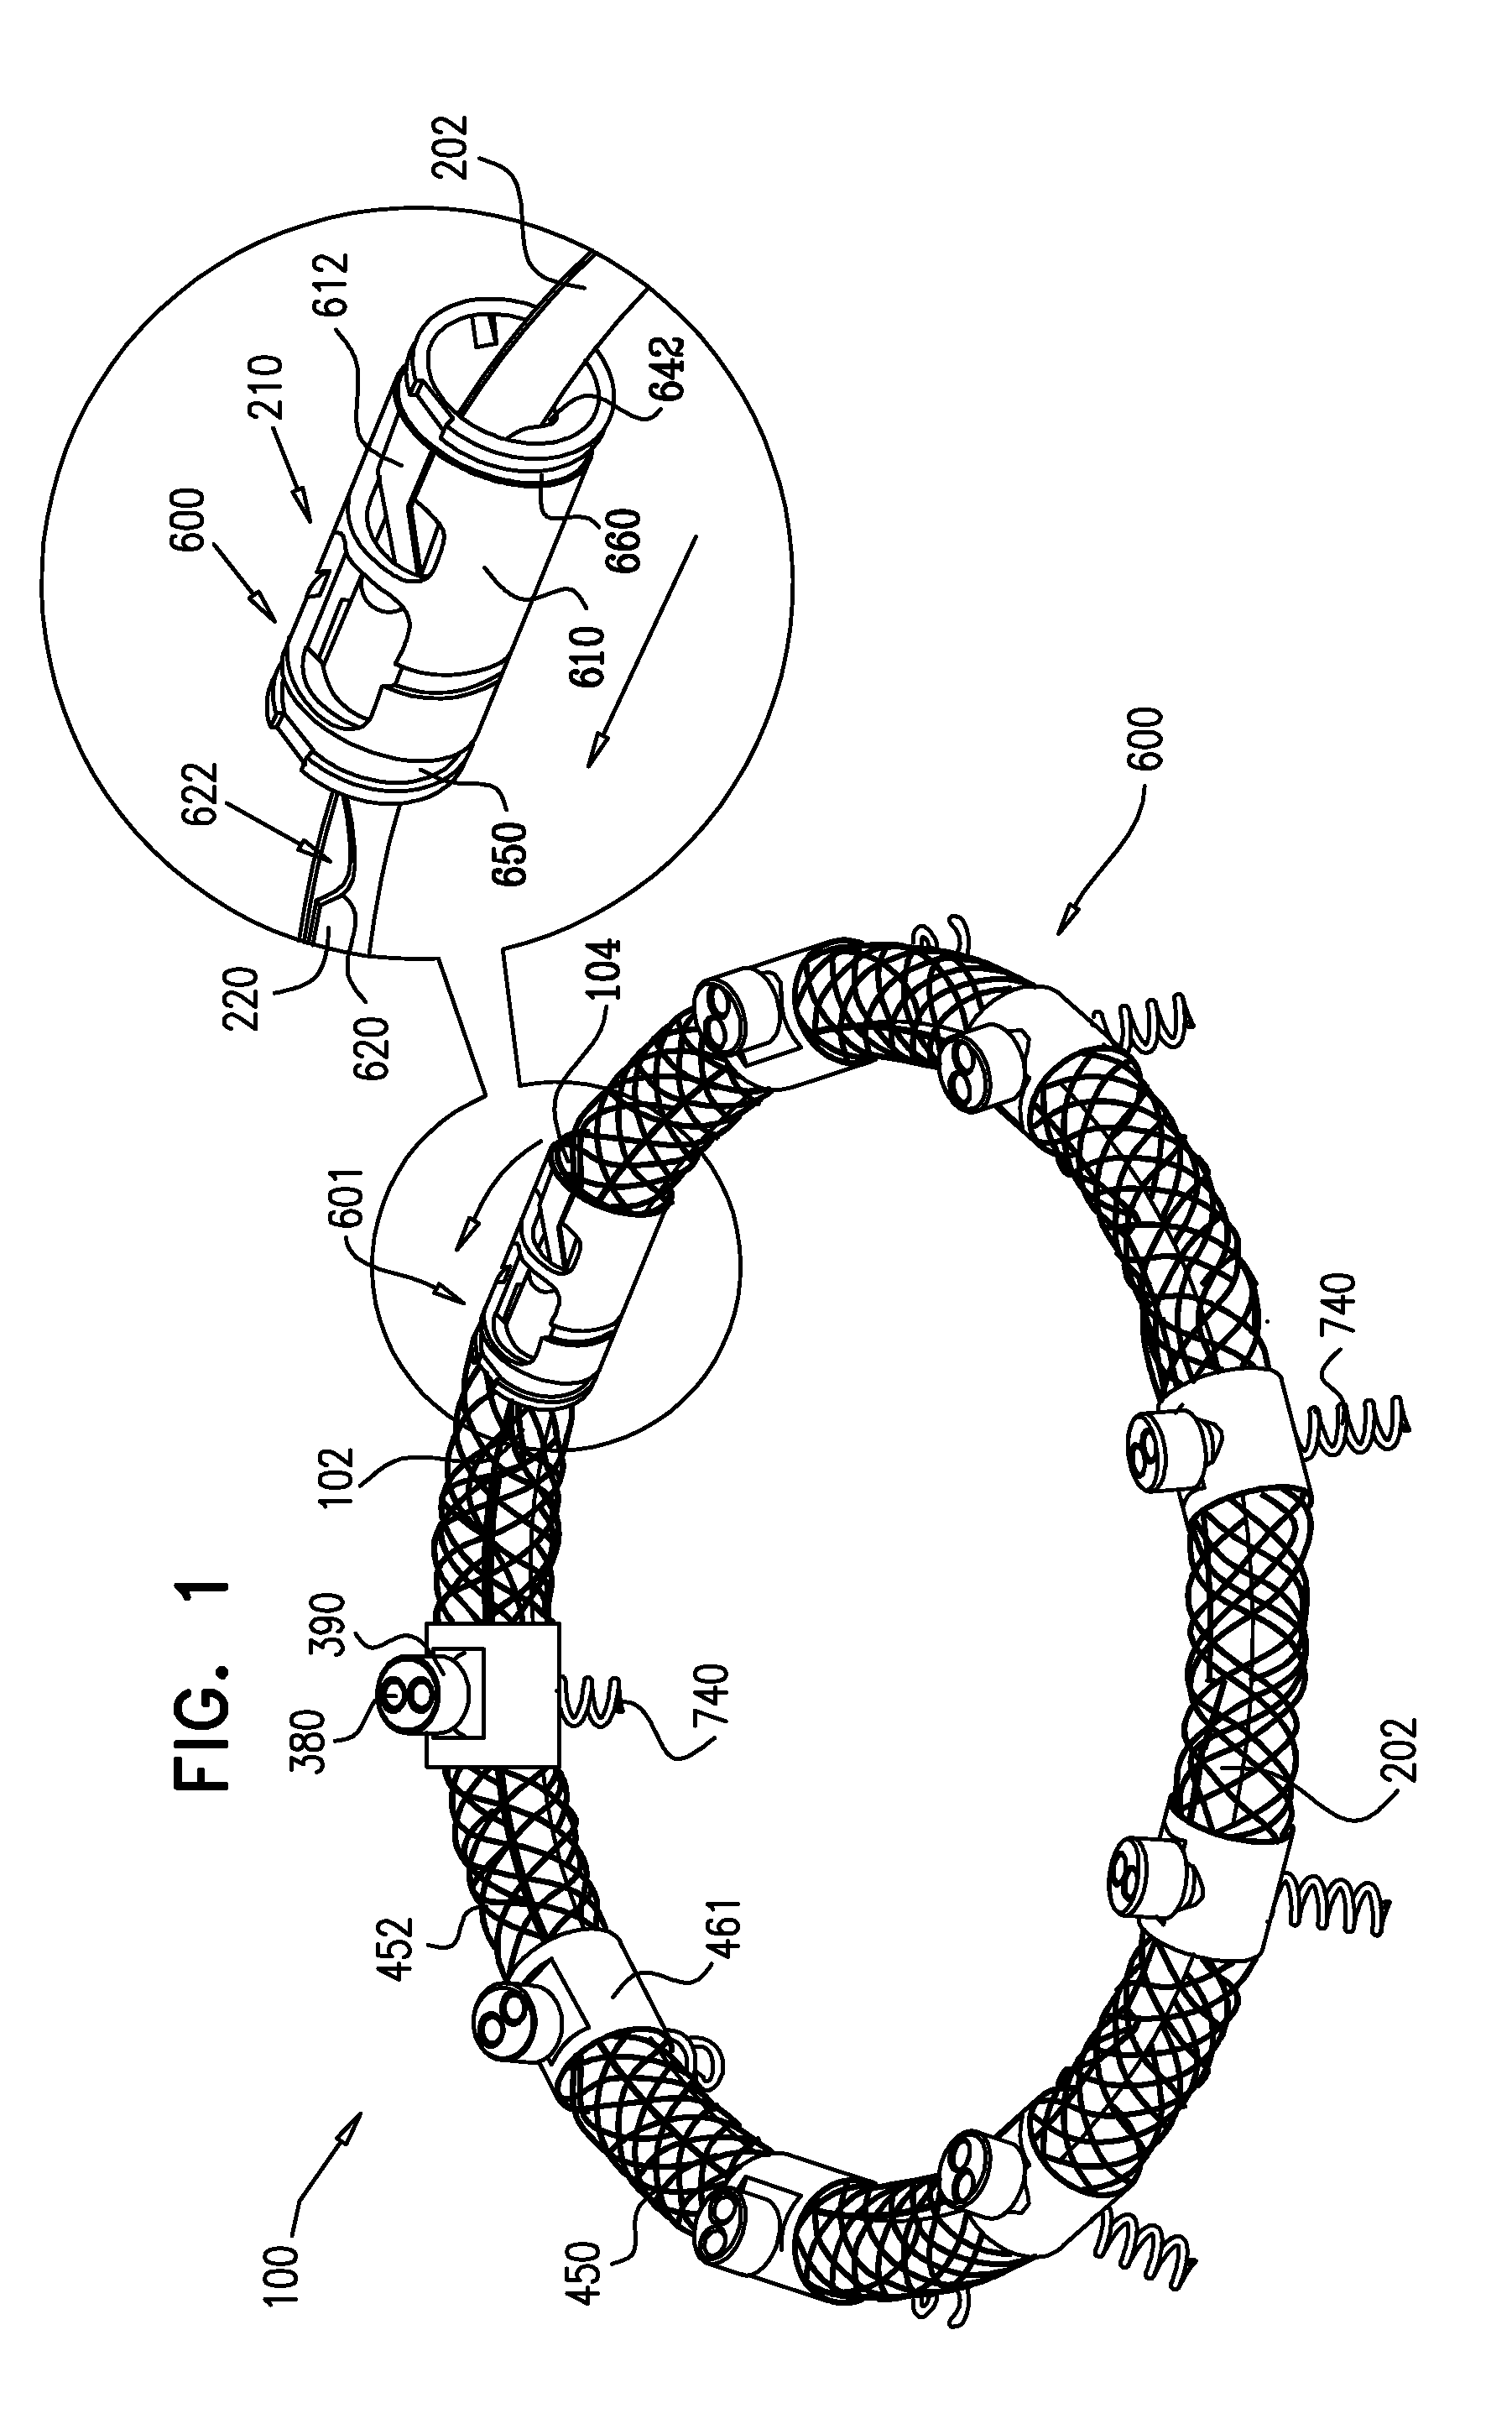 Implant and anchor placement